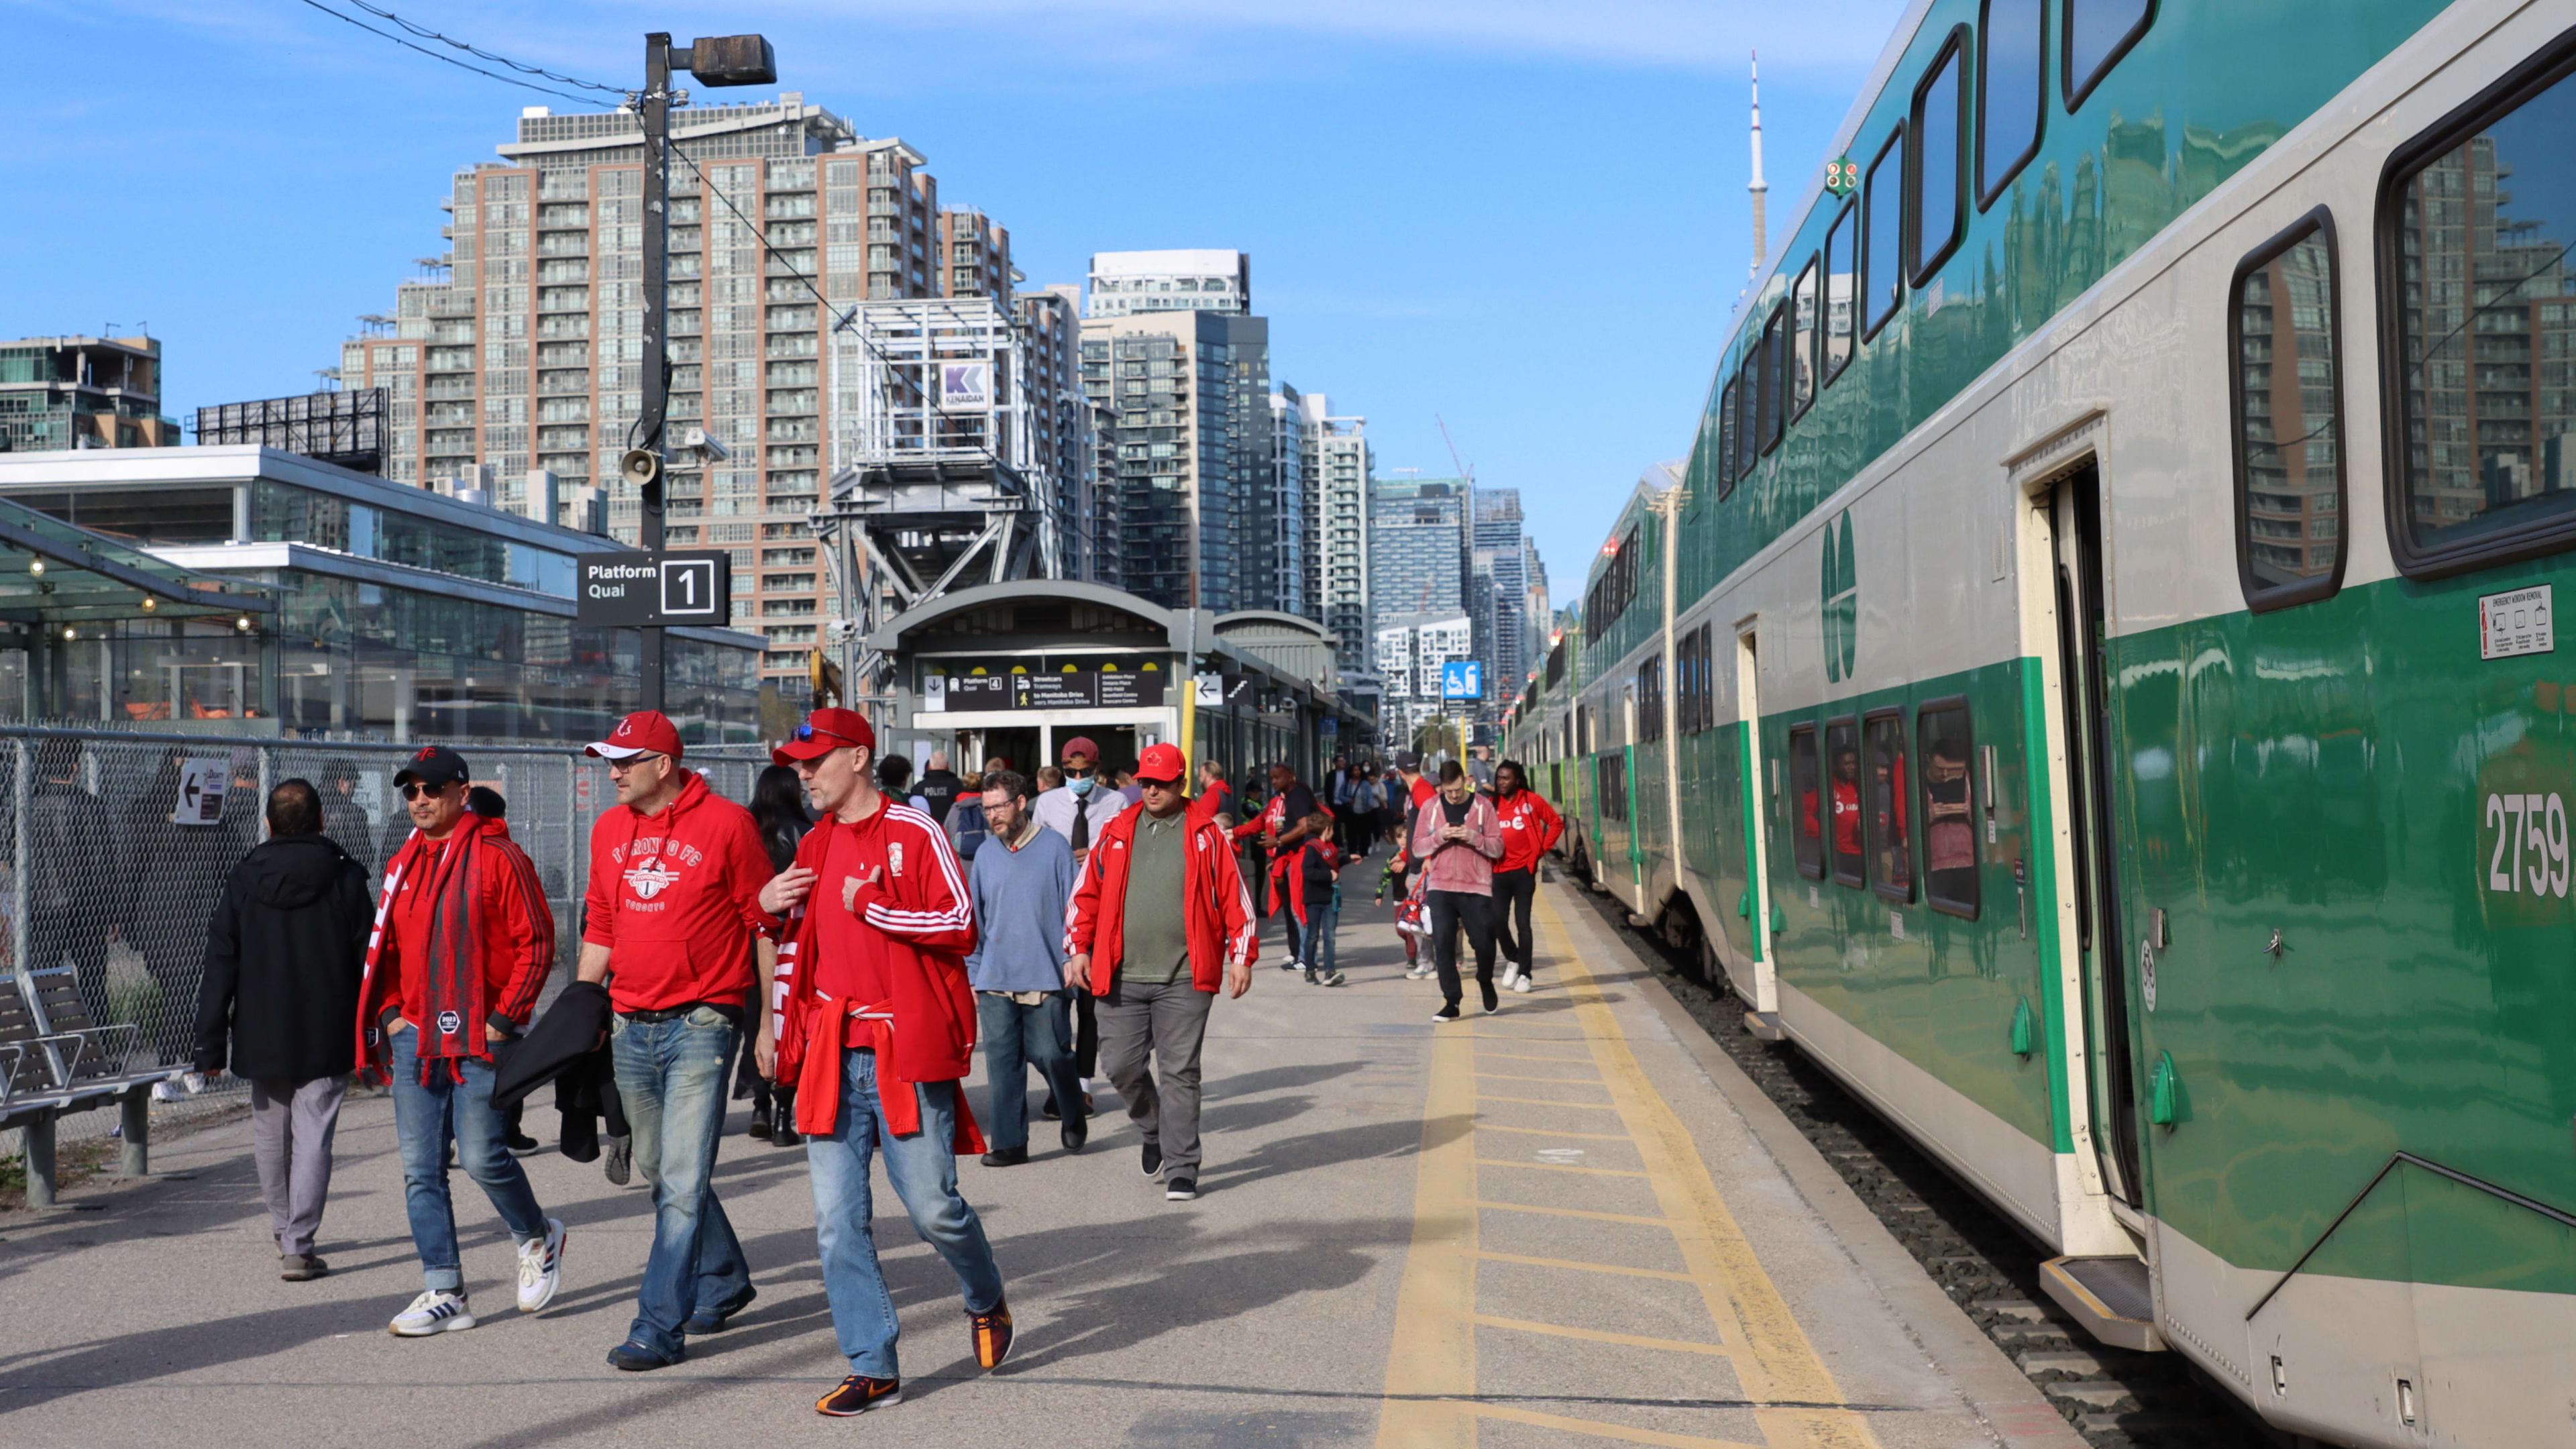 TFC fans disembark from train and head towards Liberty Village